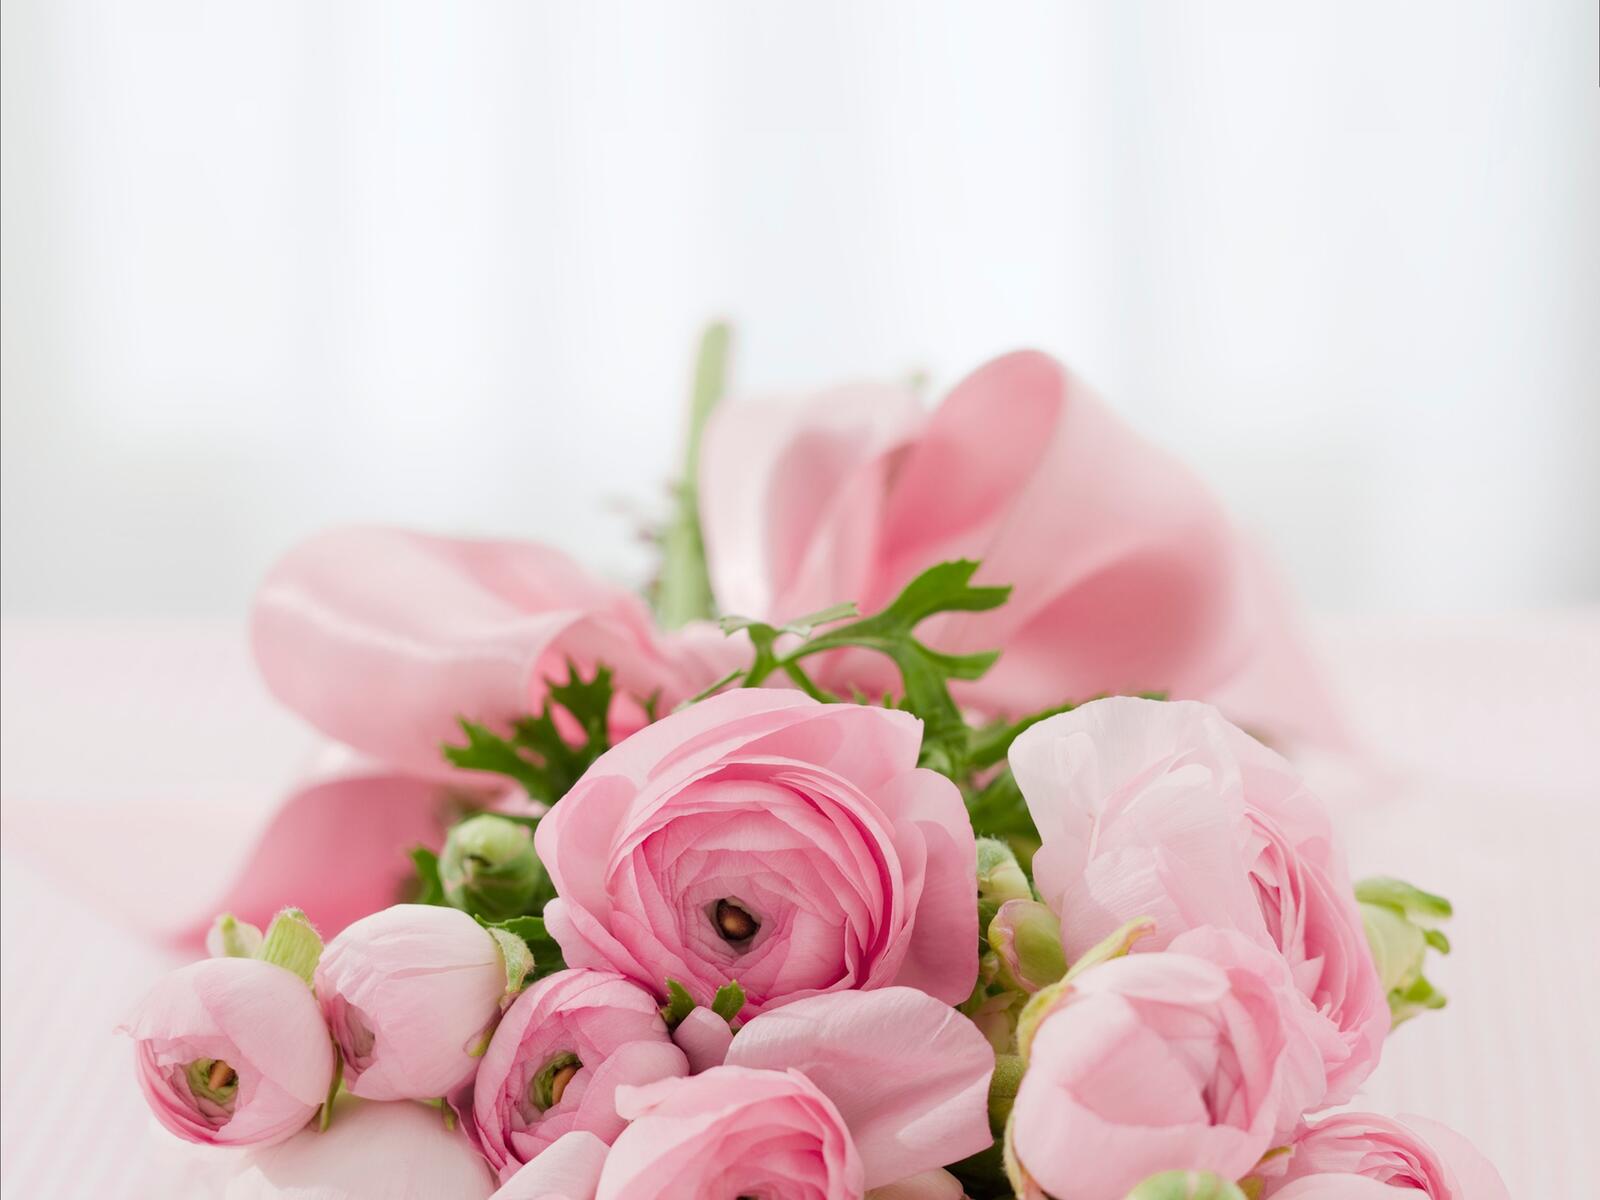 Free photo Bouquet of pink roses on a blurry light background